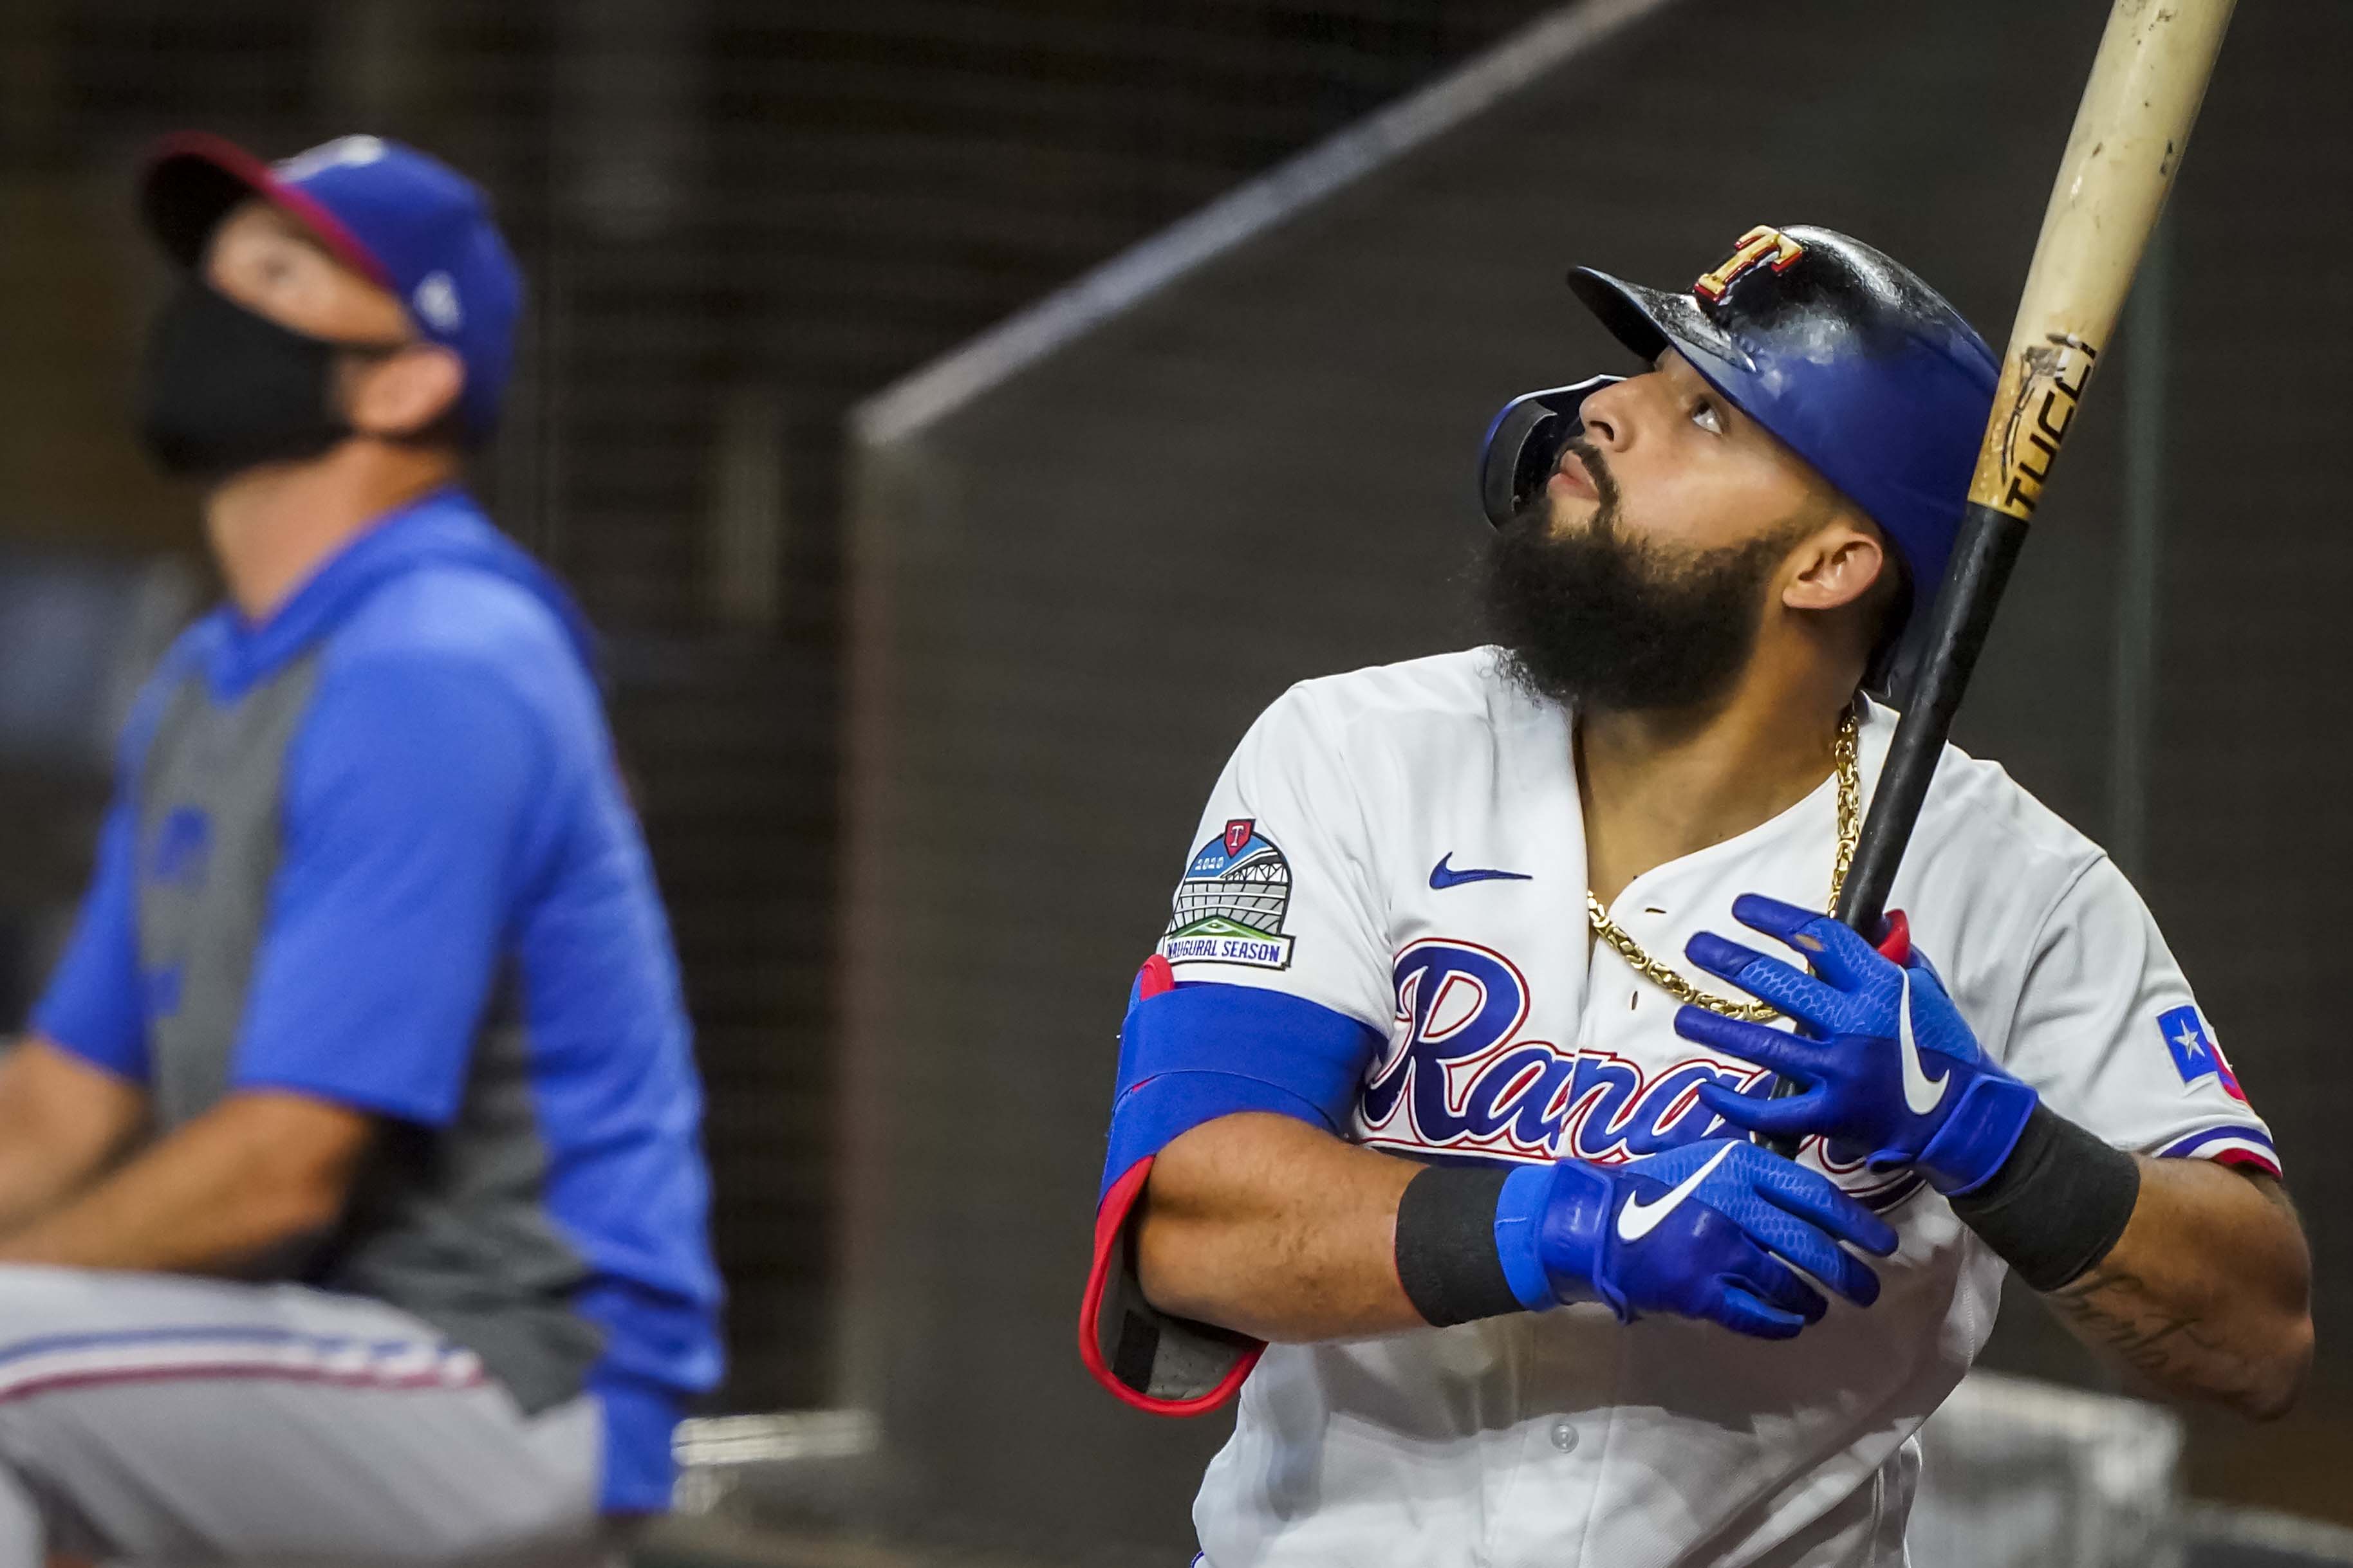 Rougned Odor: Rangers 2B makes history with five-walk game